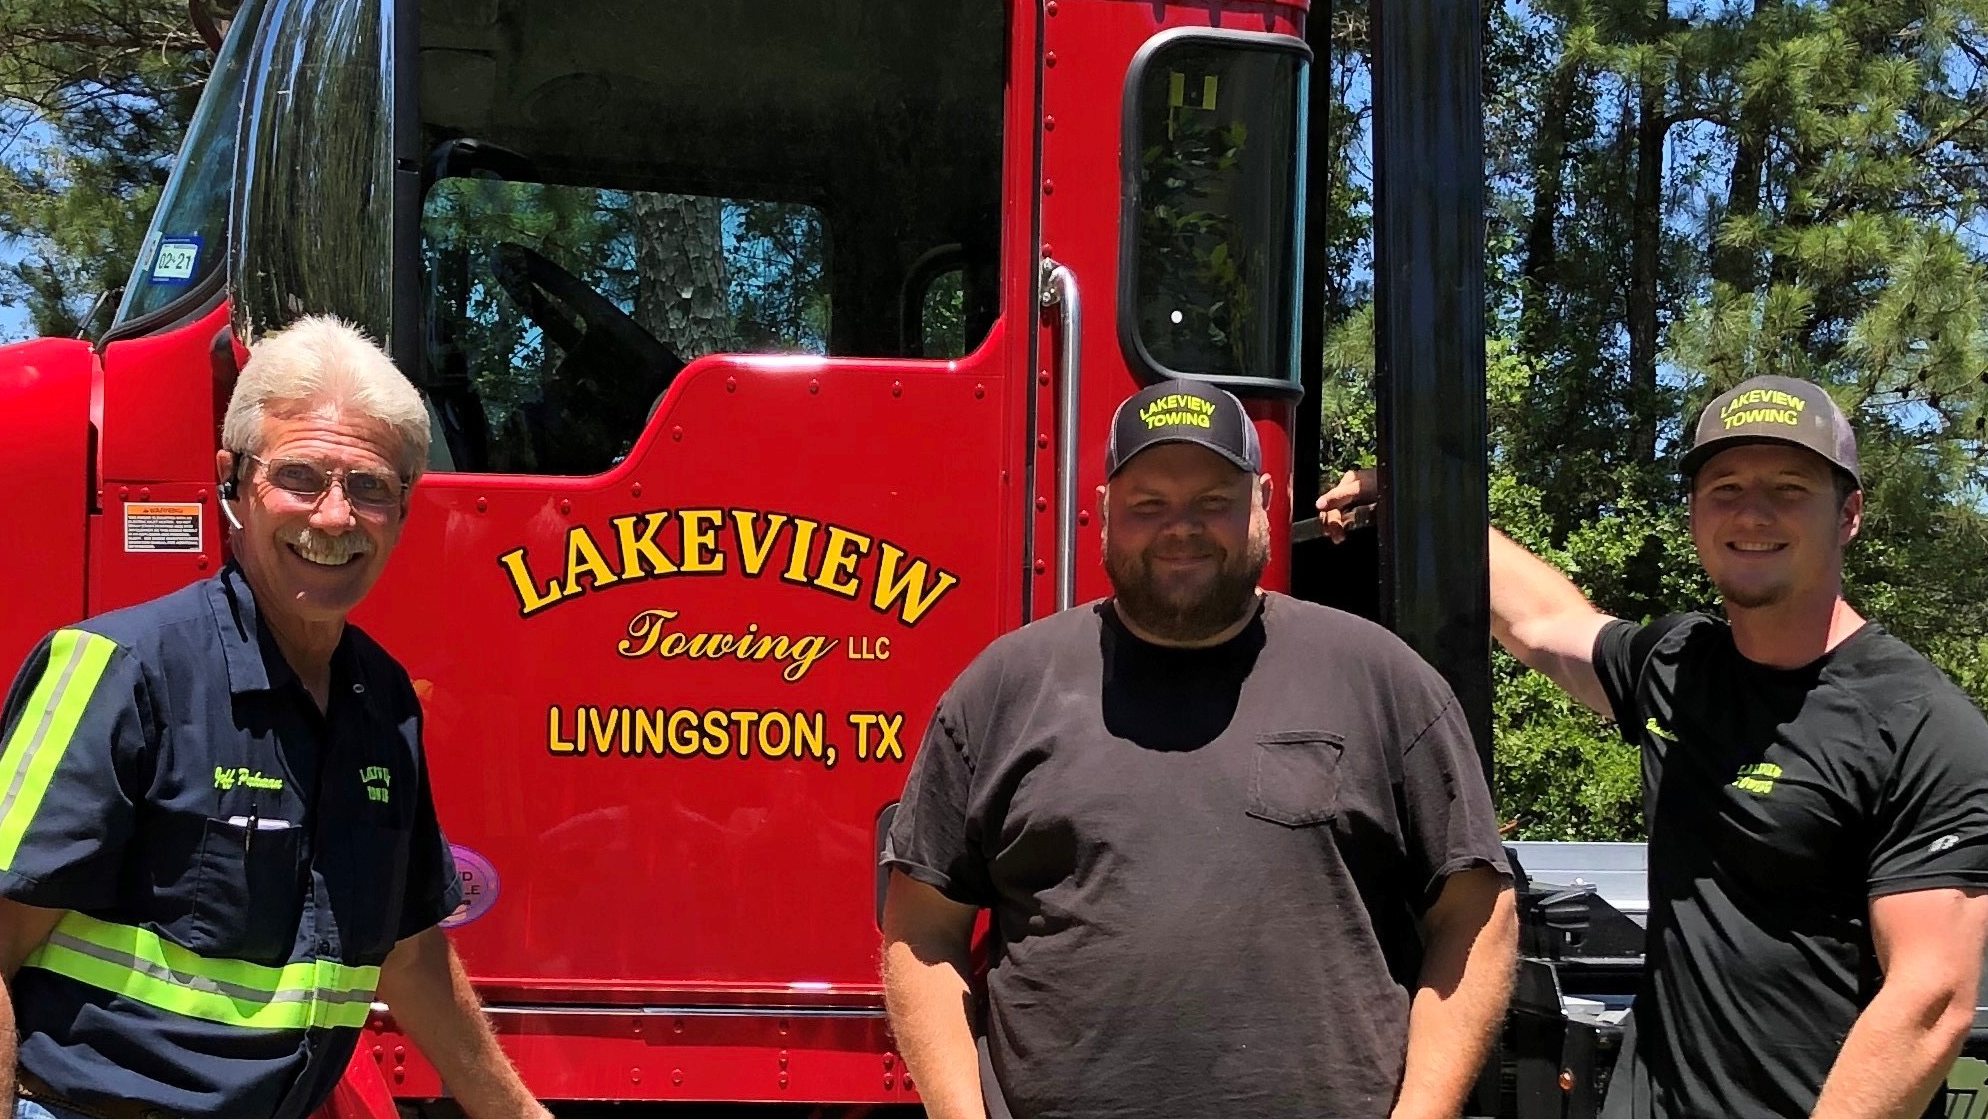 Lakeview Towing